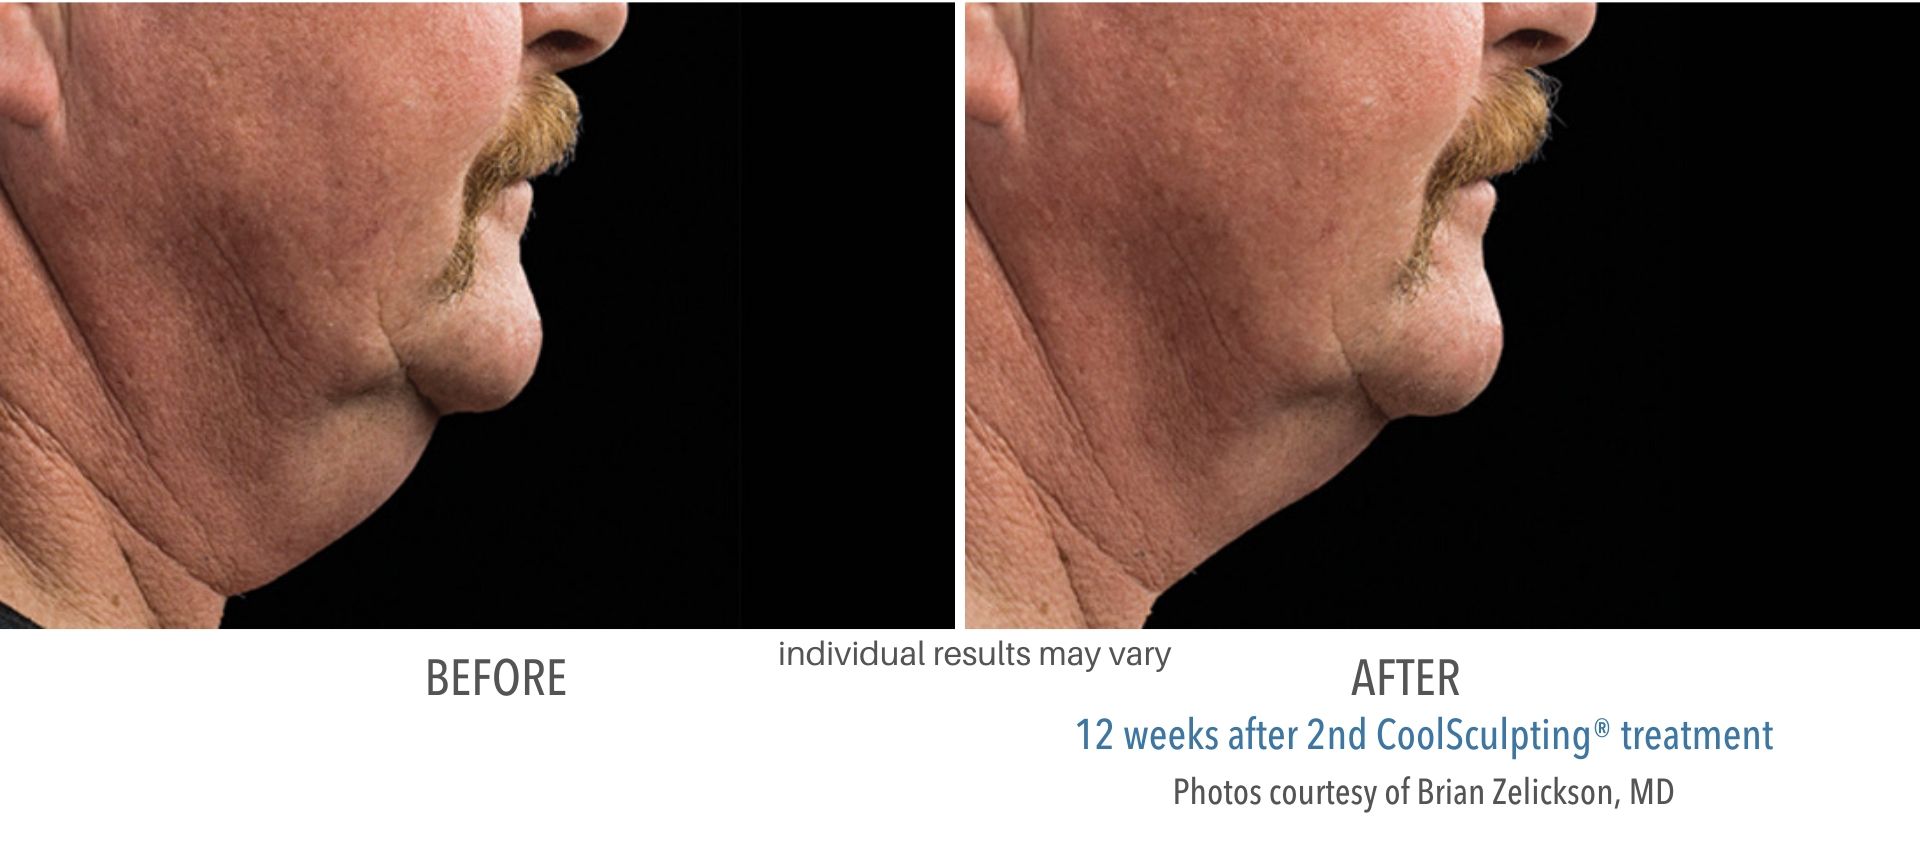 coolsculpting before and after male chin fat Laser + Skin Institute in Chatham, NJ